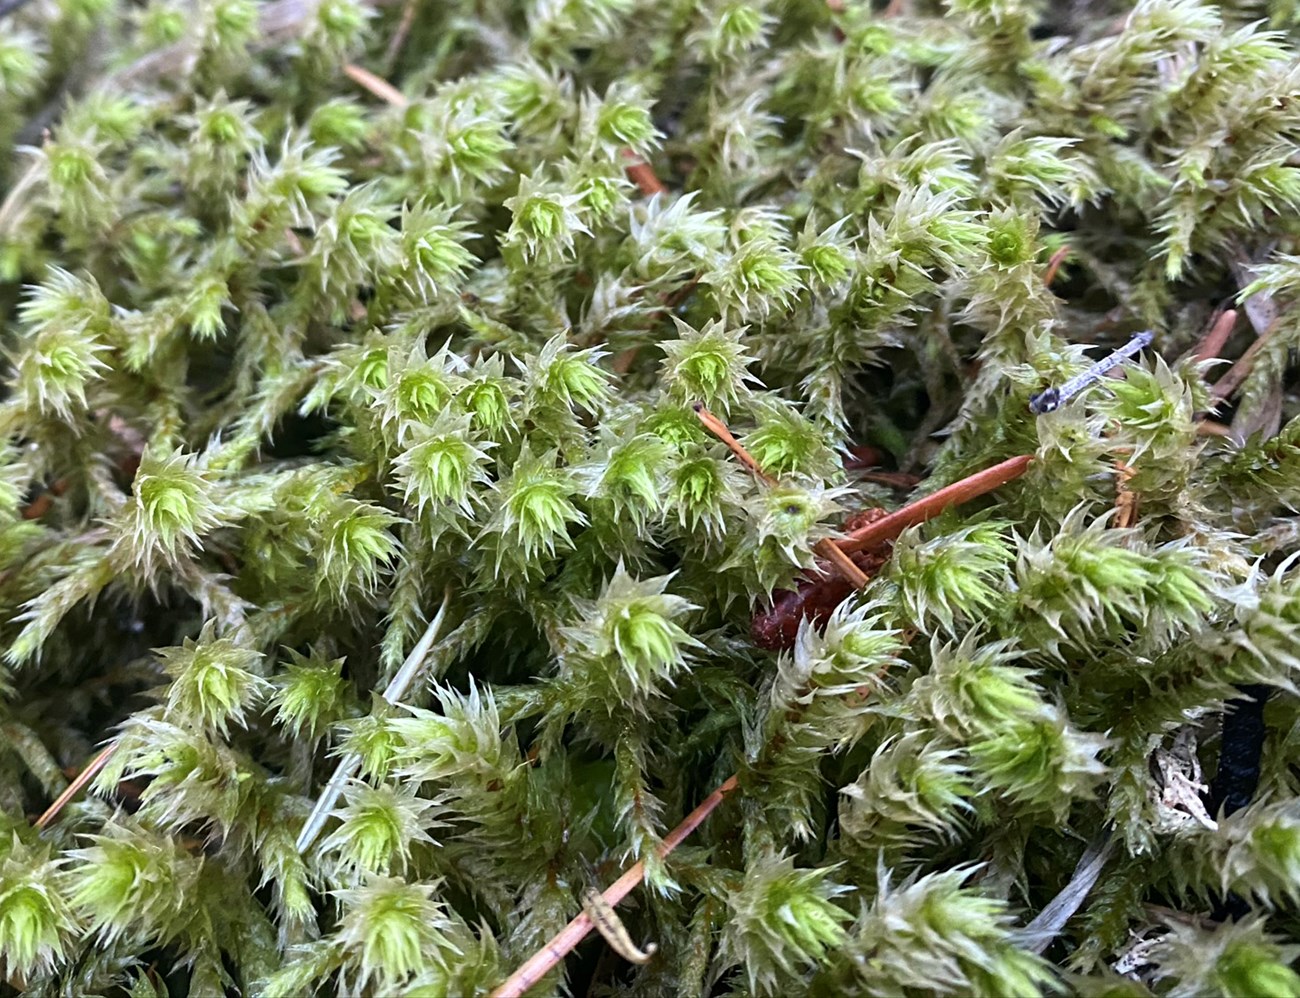 Clump of upright green moss stems with pointed leaves in a disheveled spiral around each stem